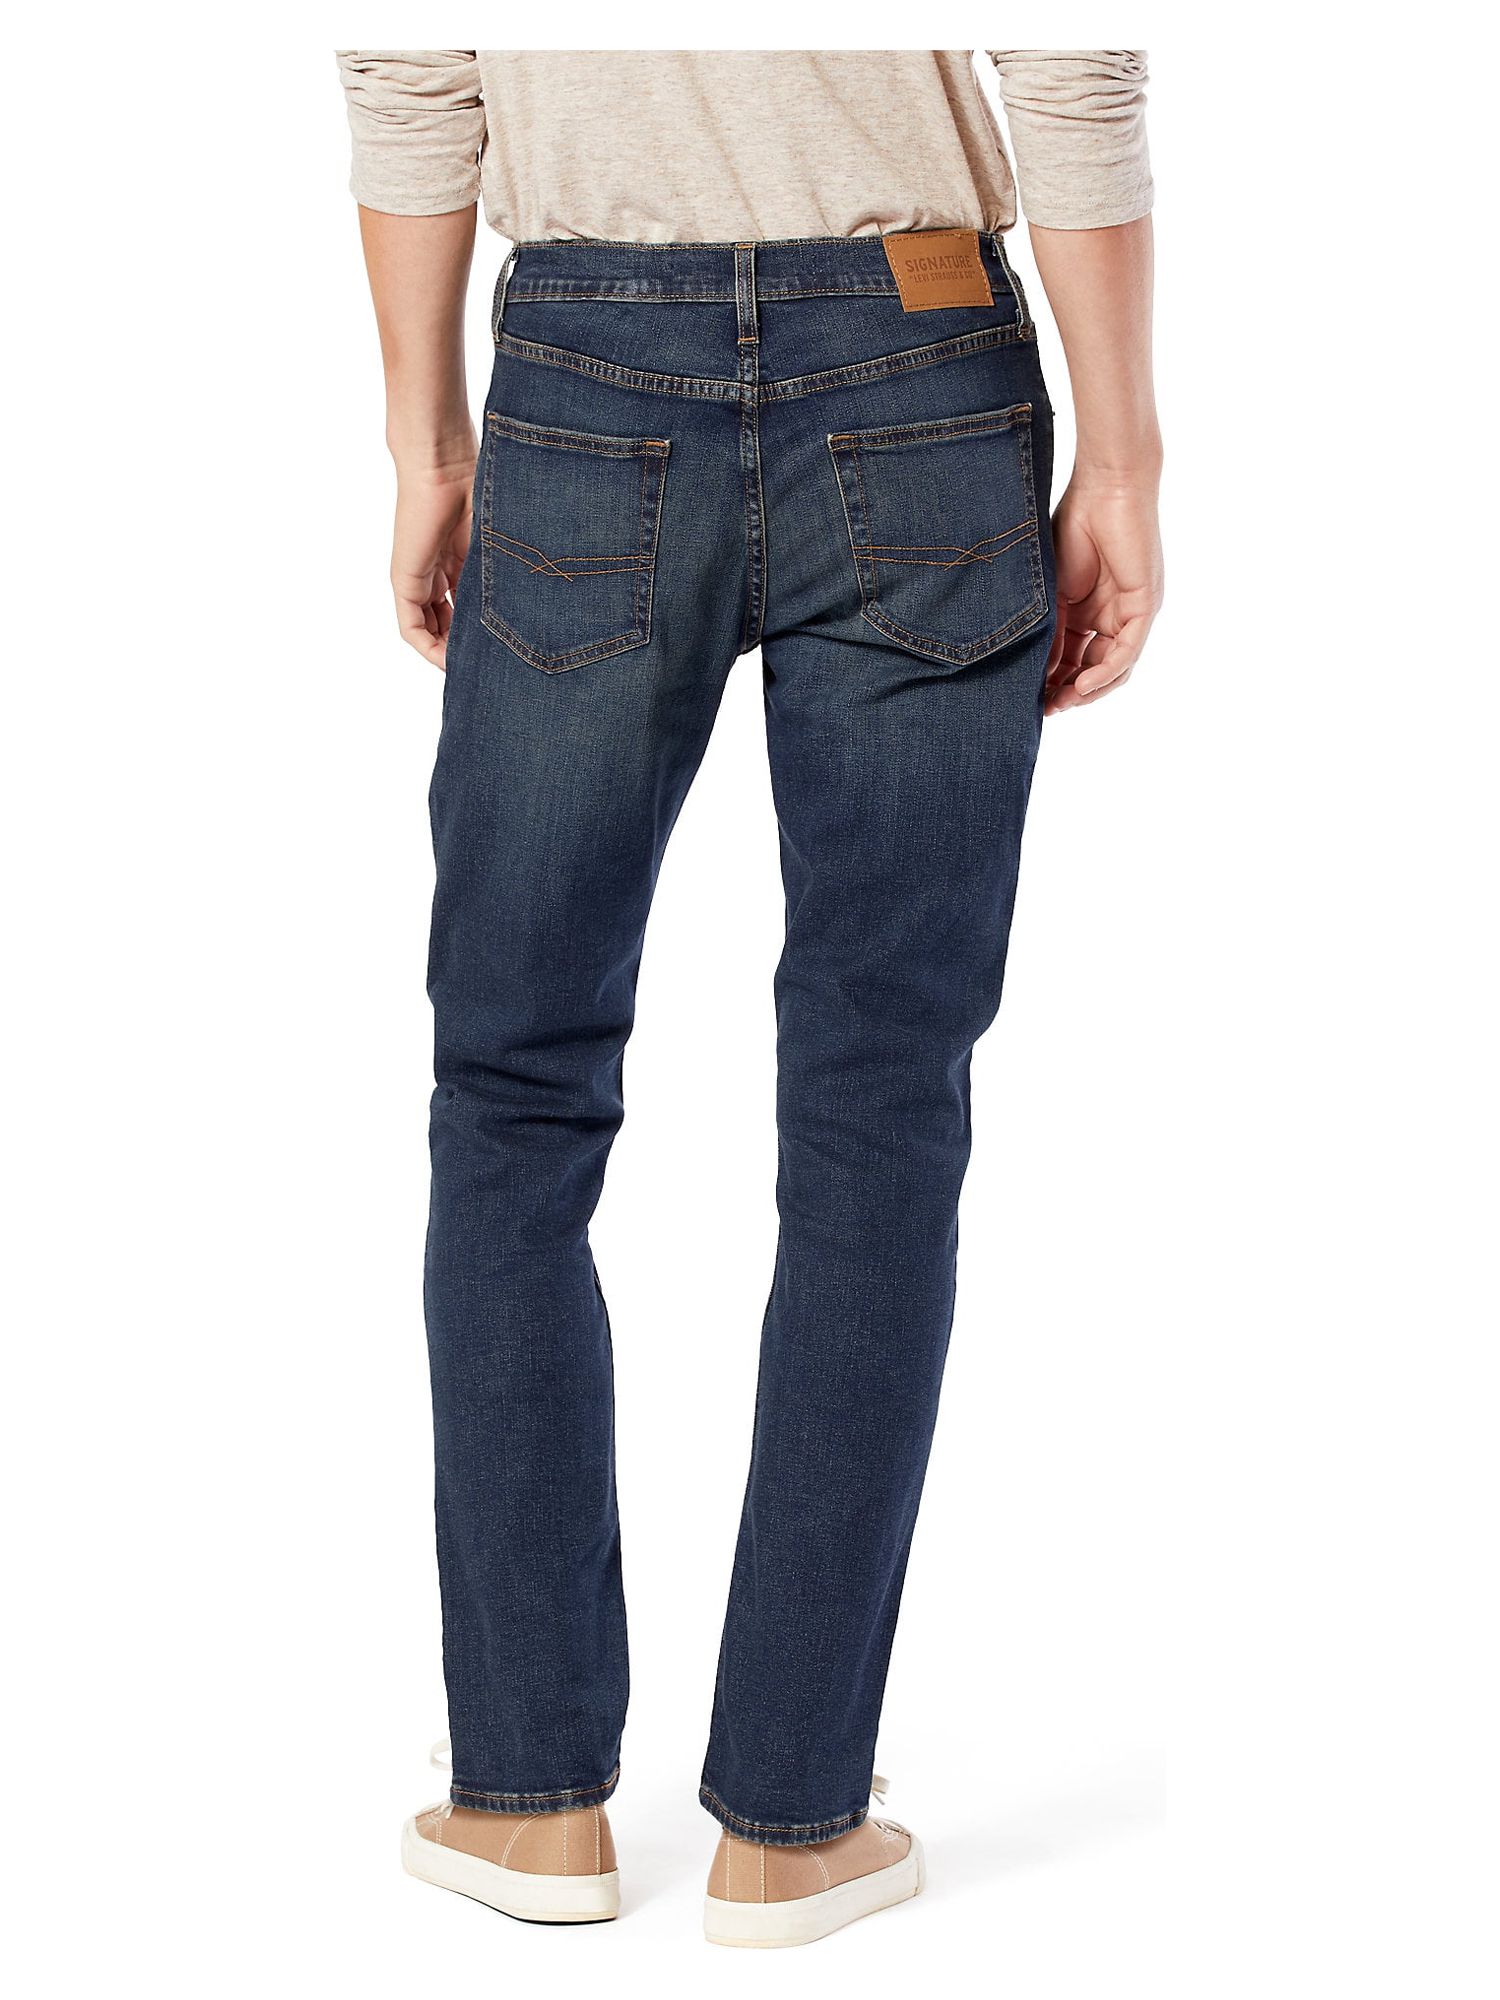 Signature by Levi Strauss & Co. Men's and Big Men's Slim Fit Jeans - image 4 of 6